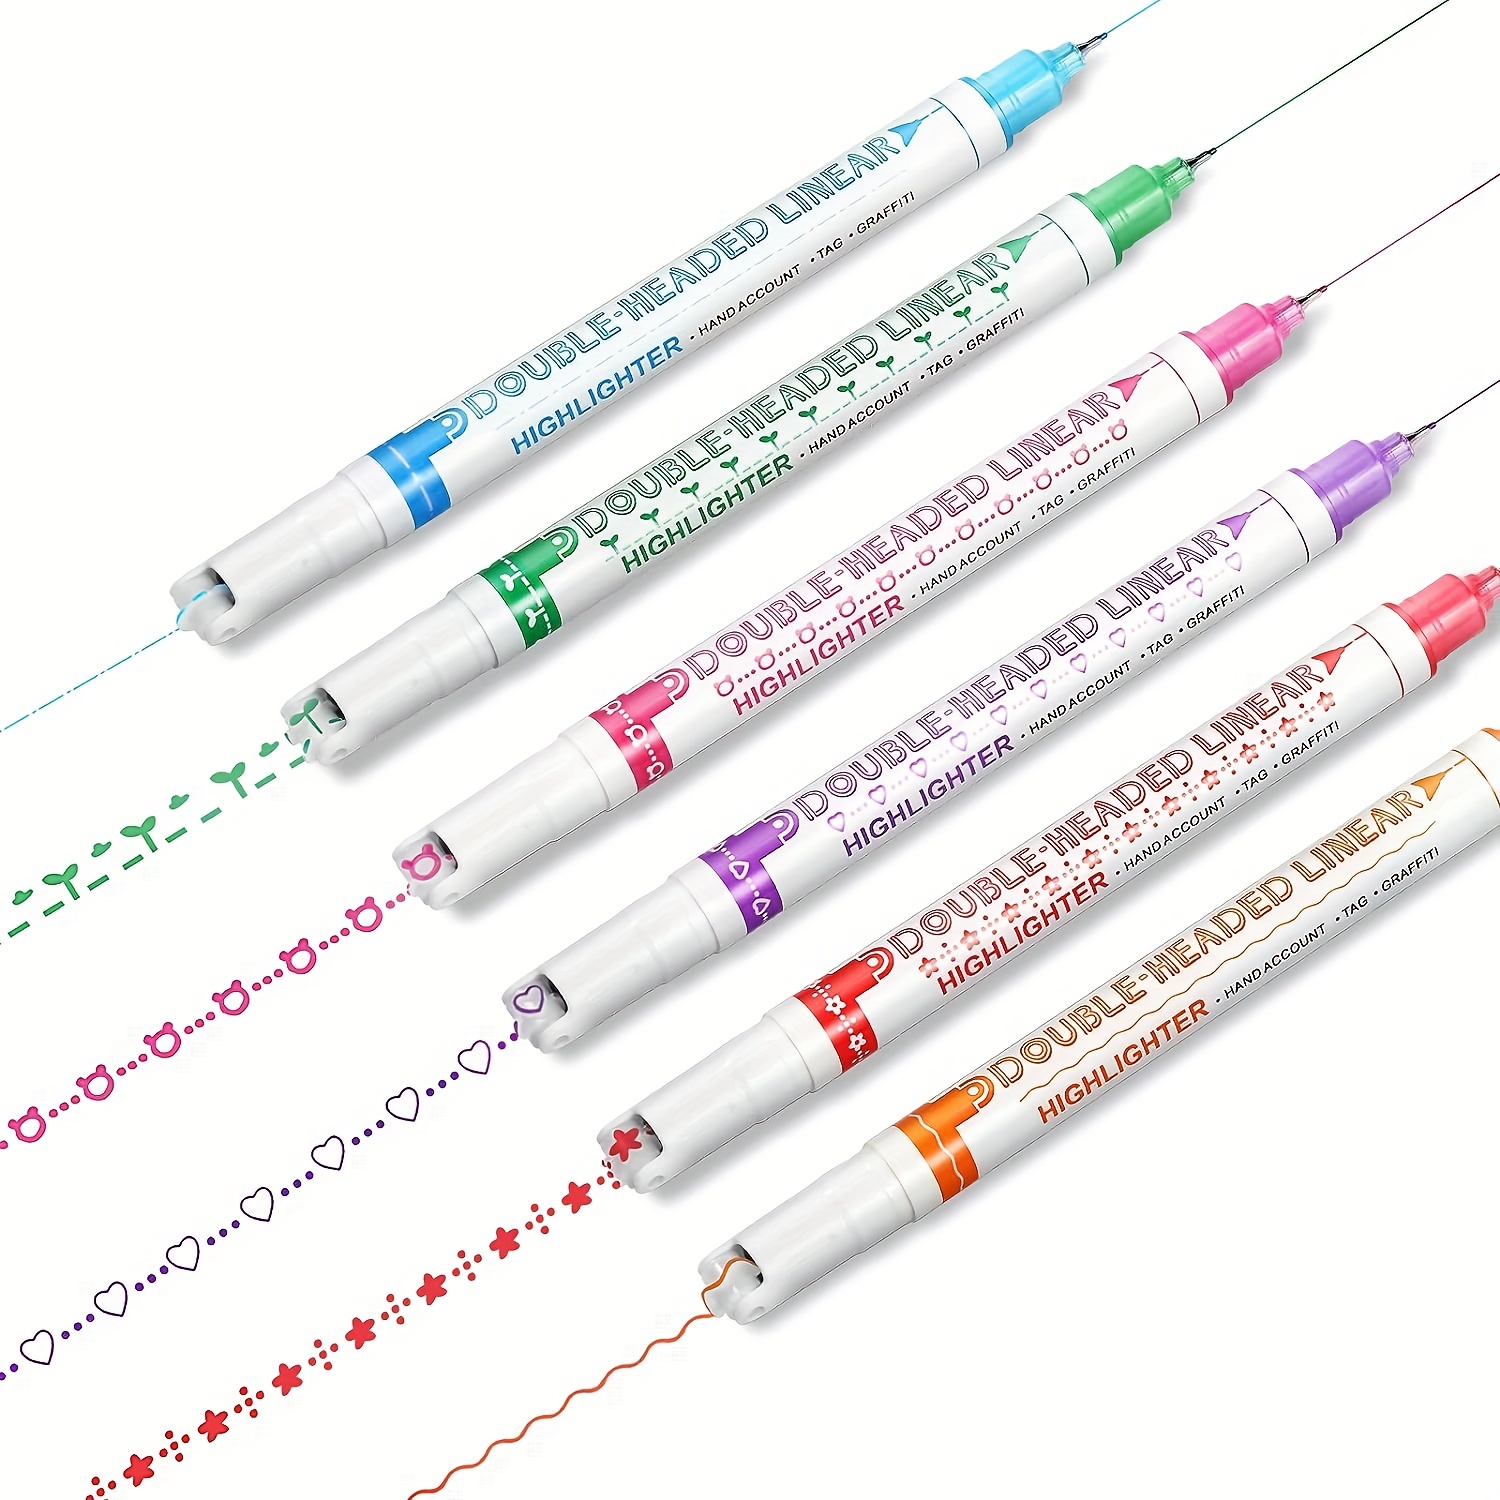 Curve Highlighter Pen Set, Dual Tip Pens with 6 Different Curve